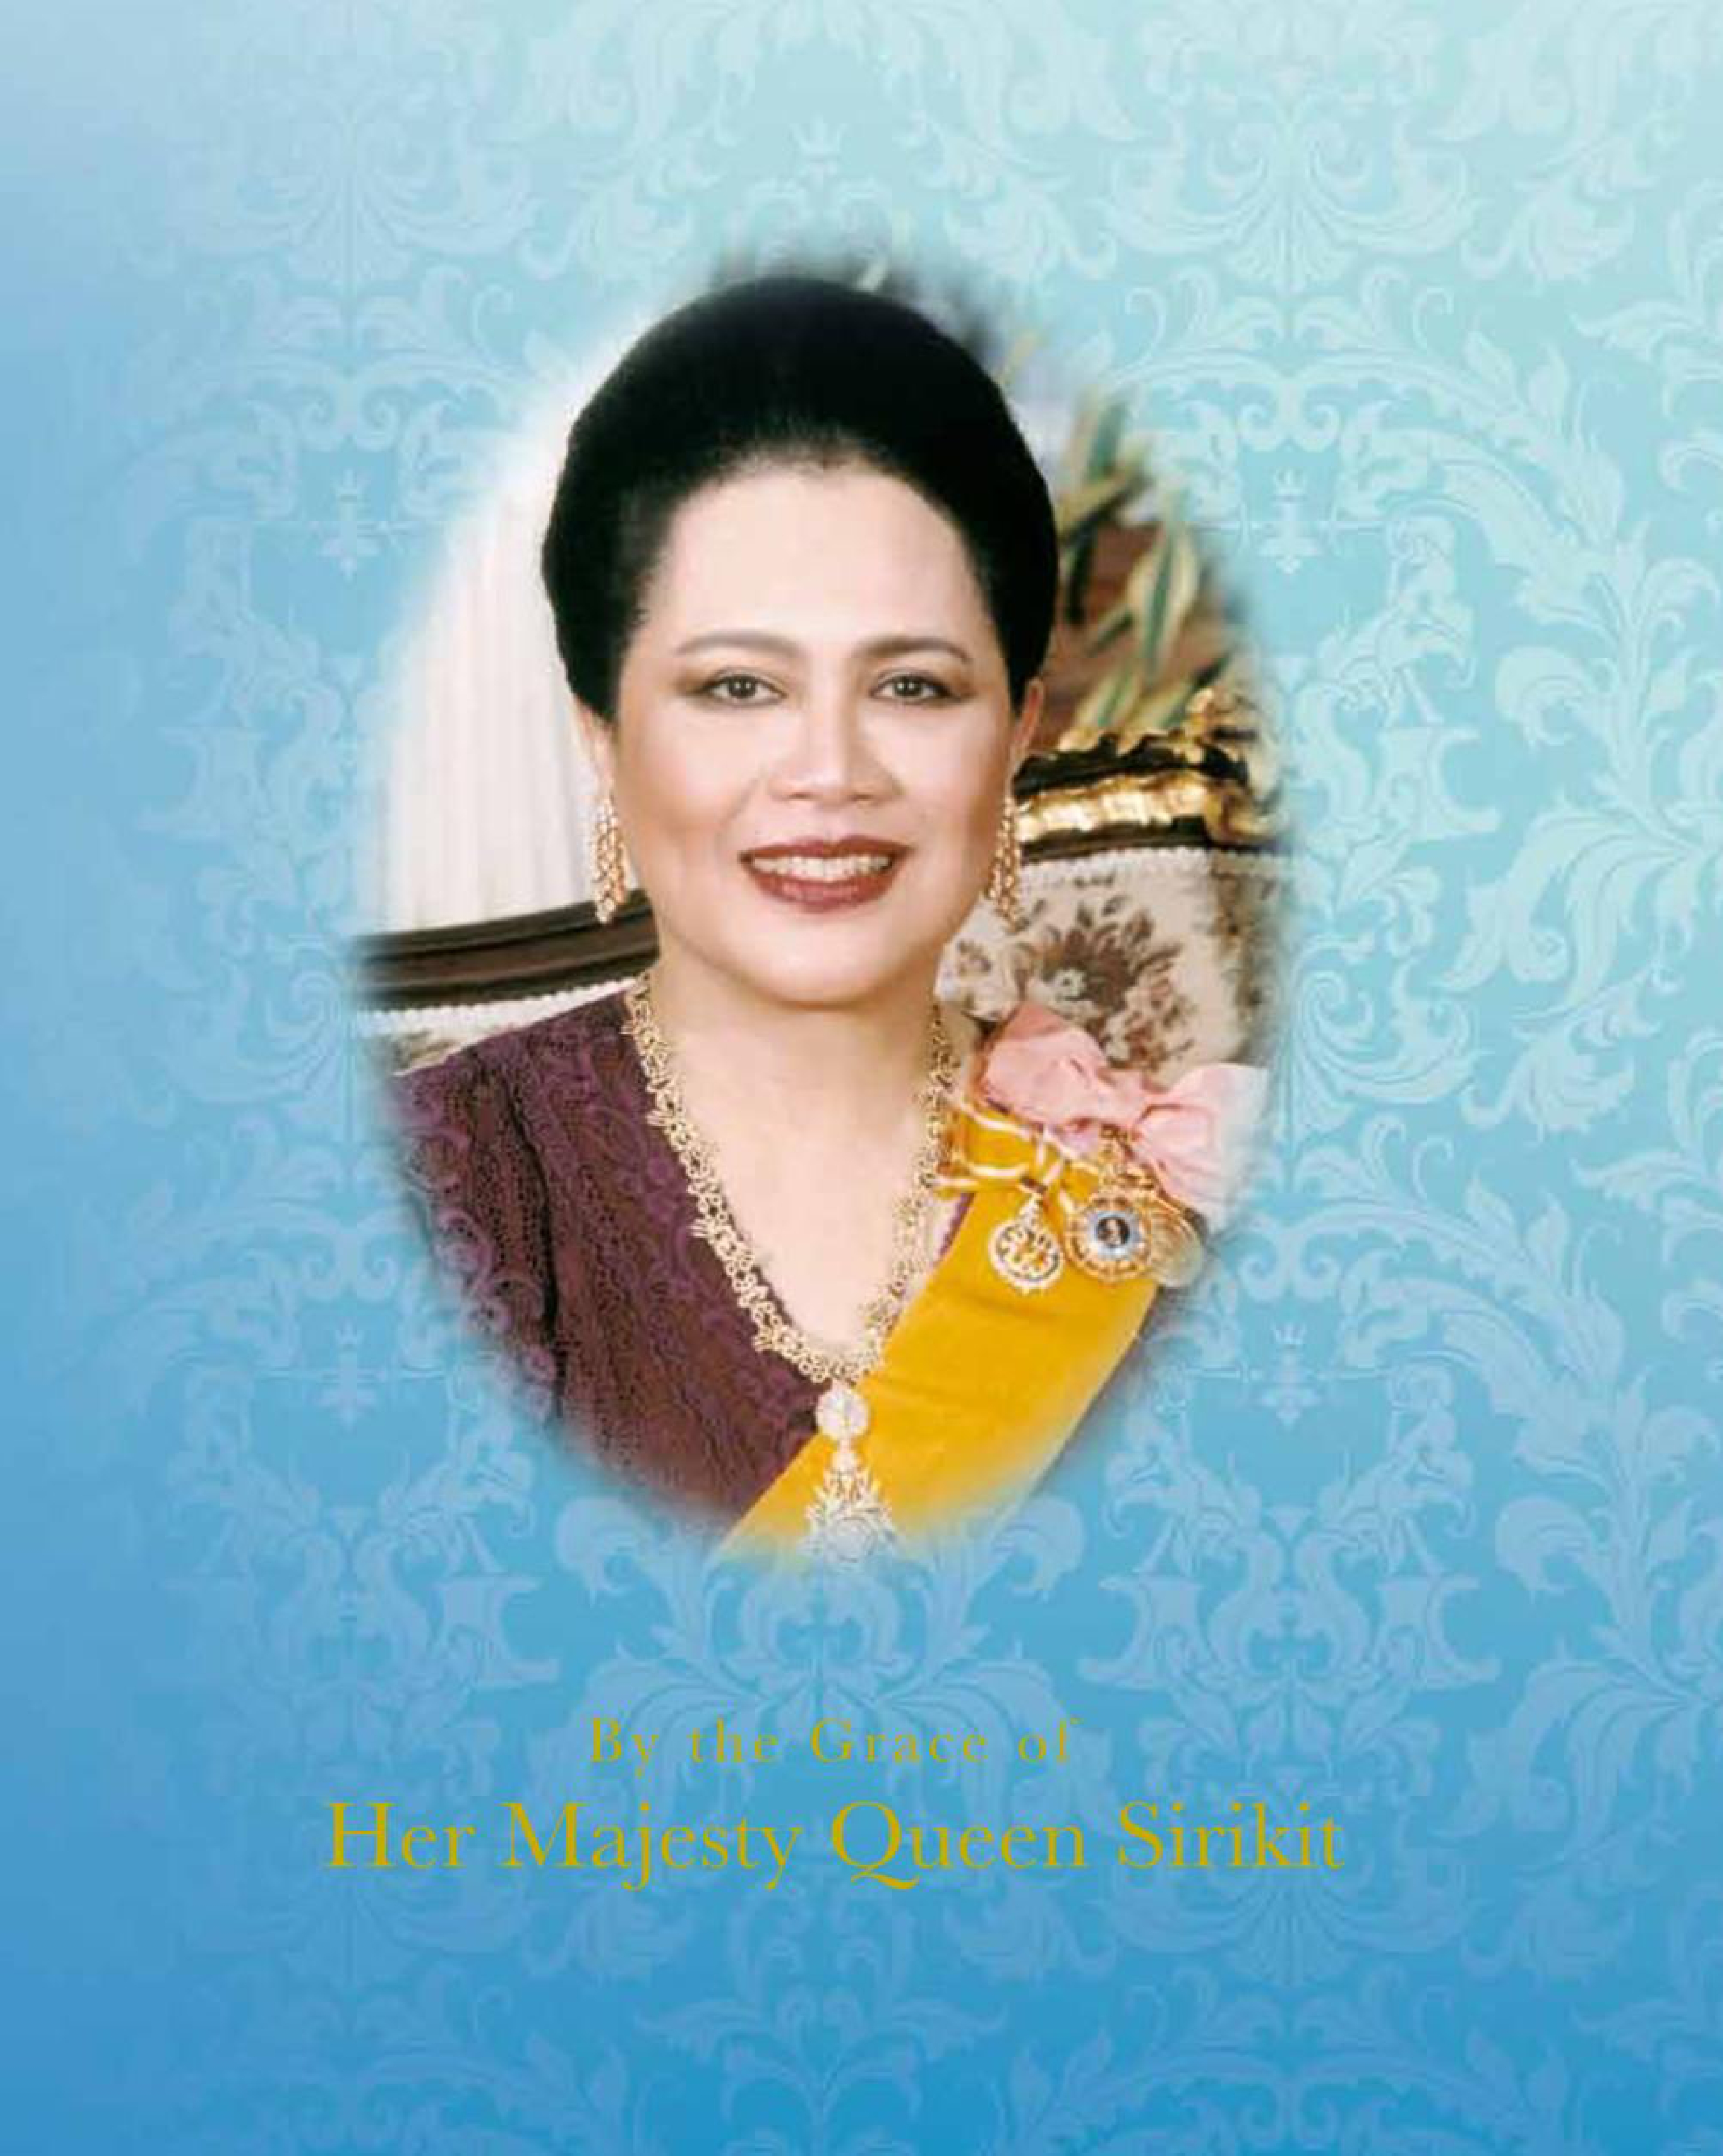 By the Grace of Her Majesty Queen Sirikit